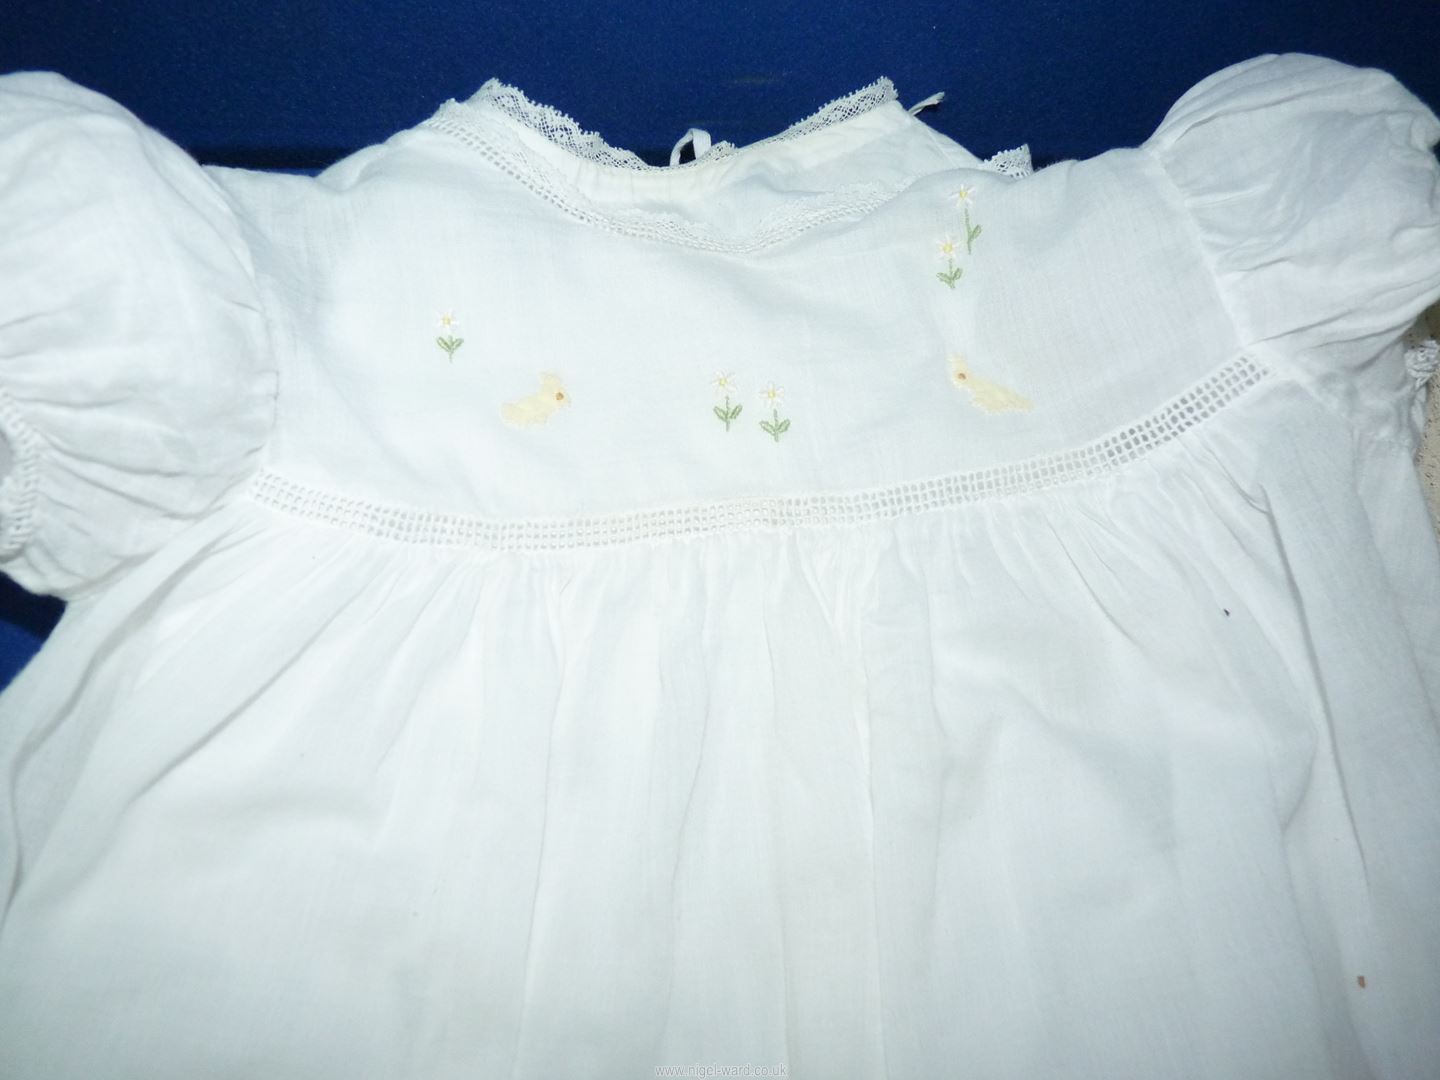 Two christening/baby Dresses and a small quantity of Maltese lace doilies. - Image 2 of 3